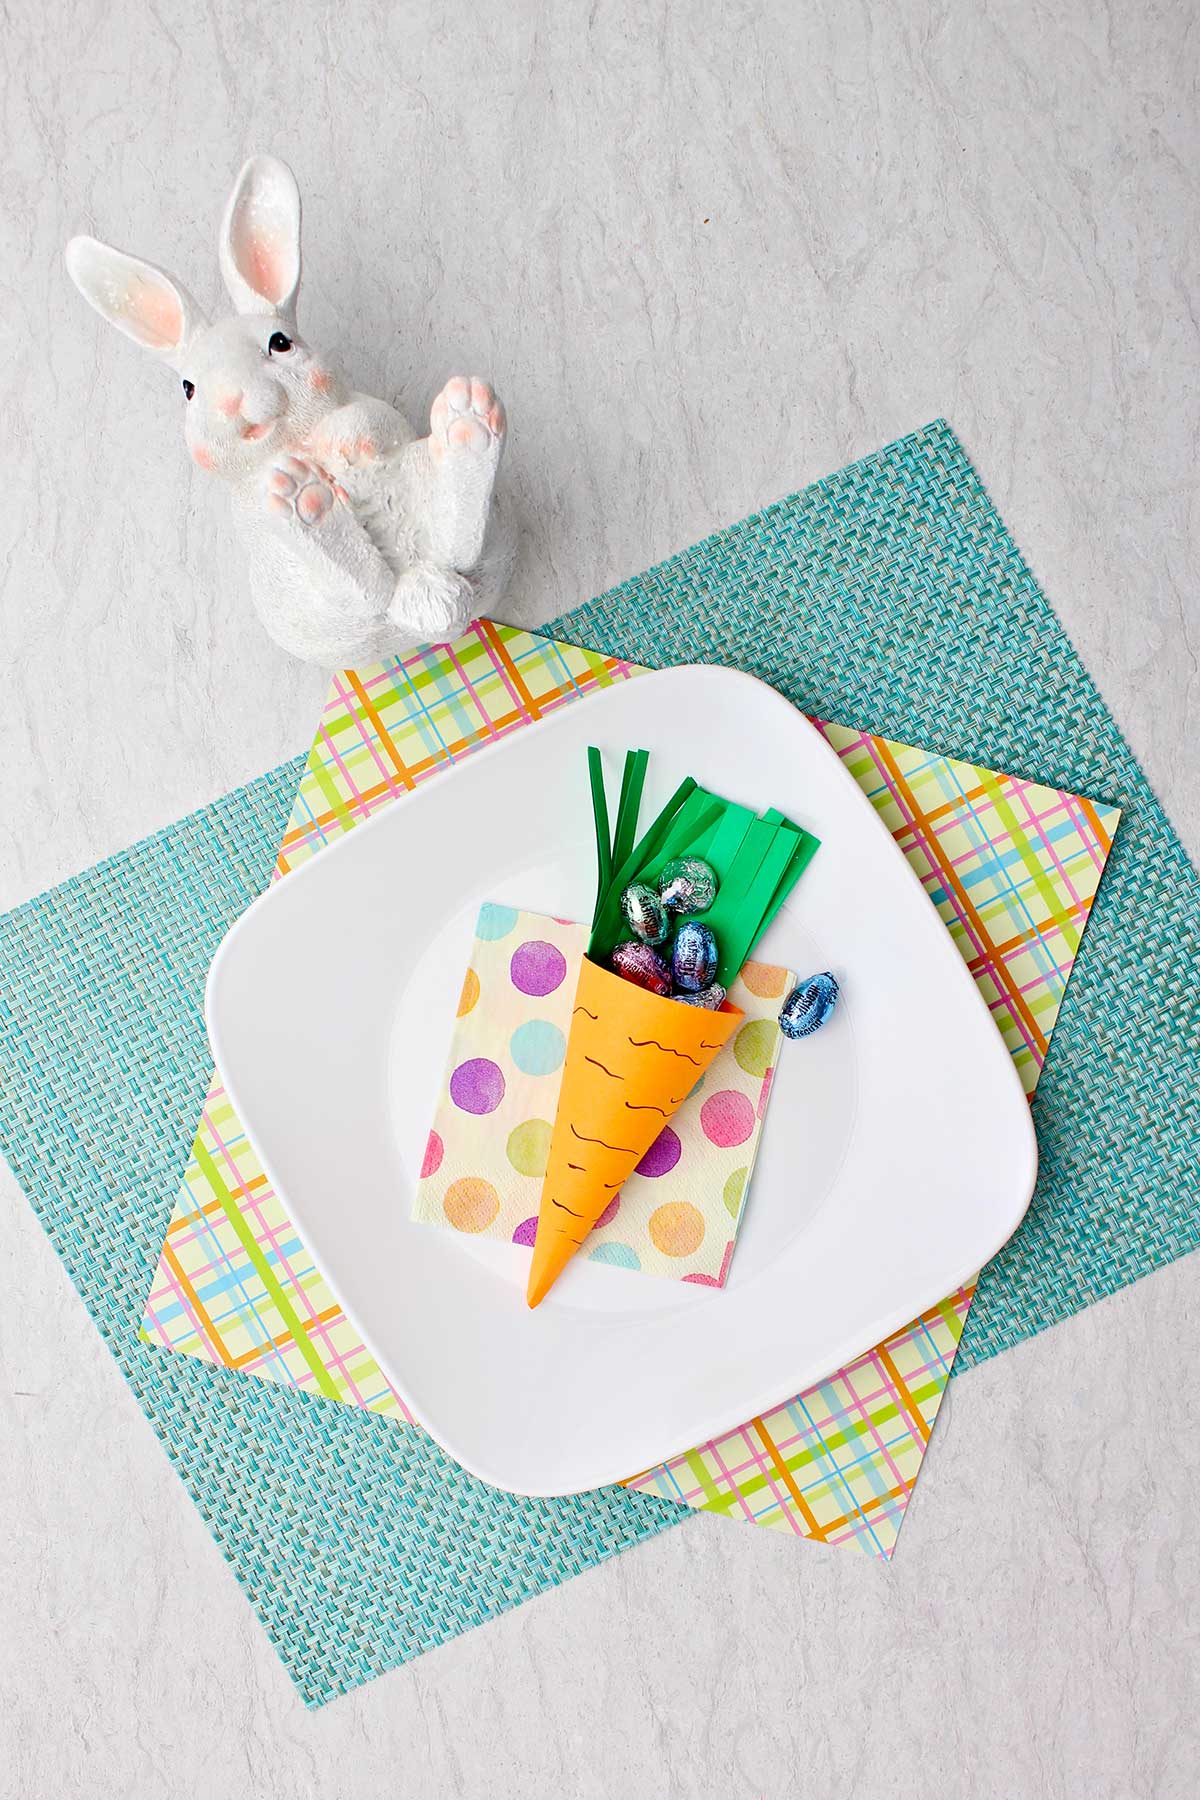 Smaller carrot Easter basket sitting on a white plate, colorful plaid piece of paper and robins egg blue placemat filled with paper grass and easter candy with white bunny statue above it.